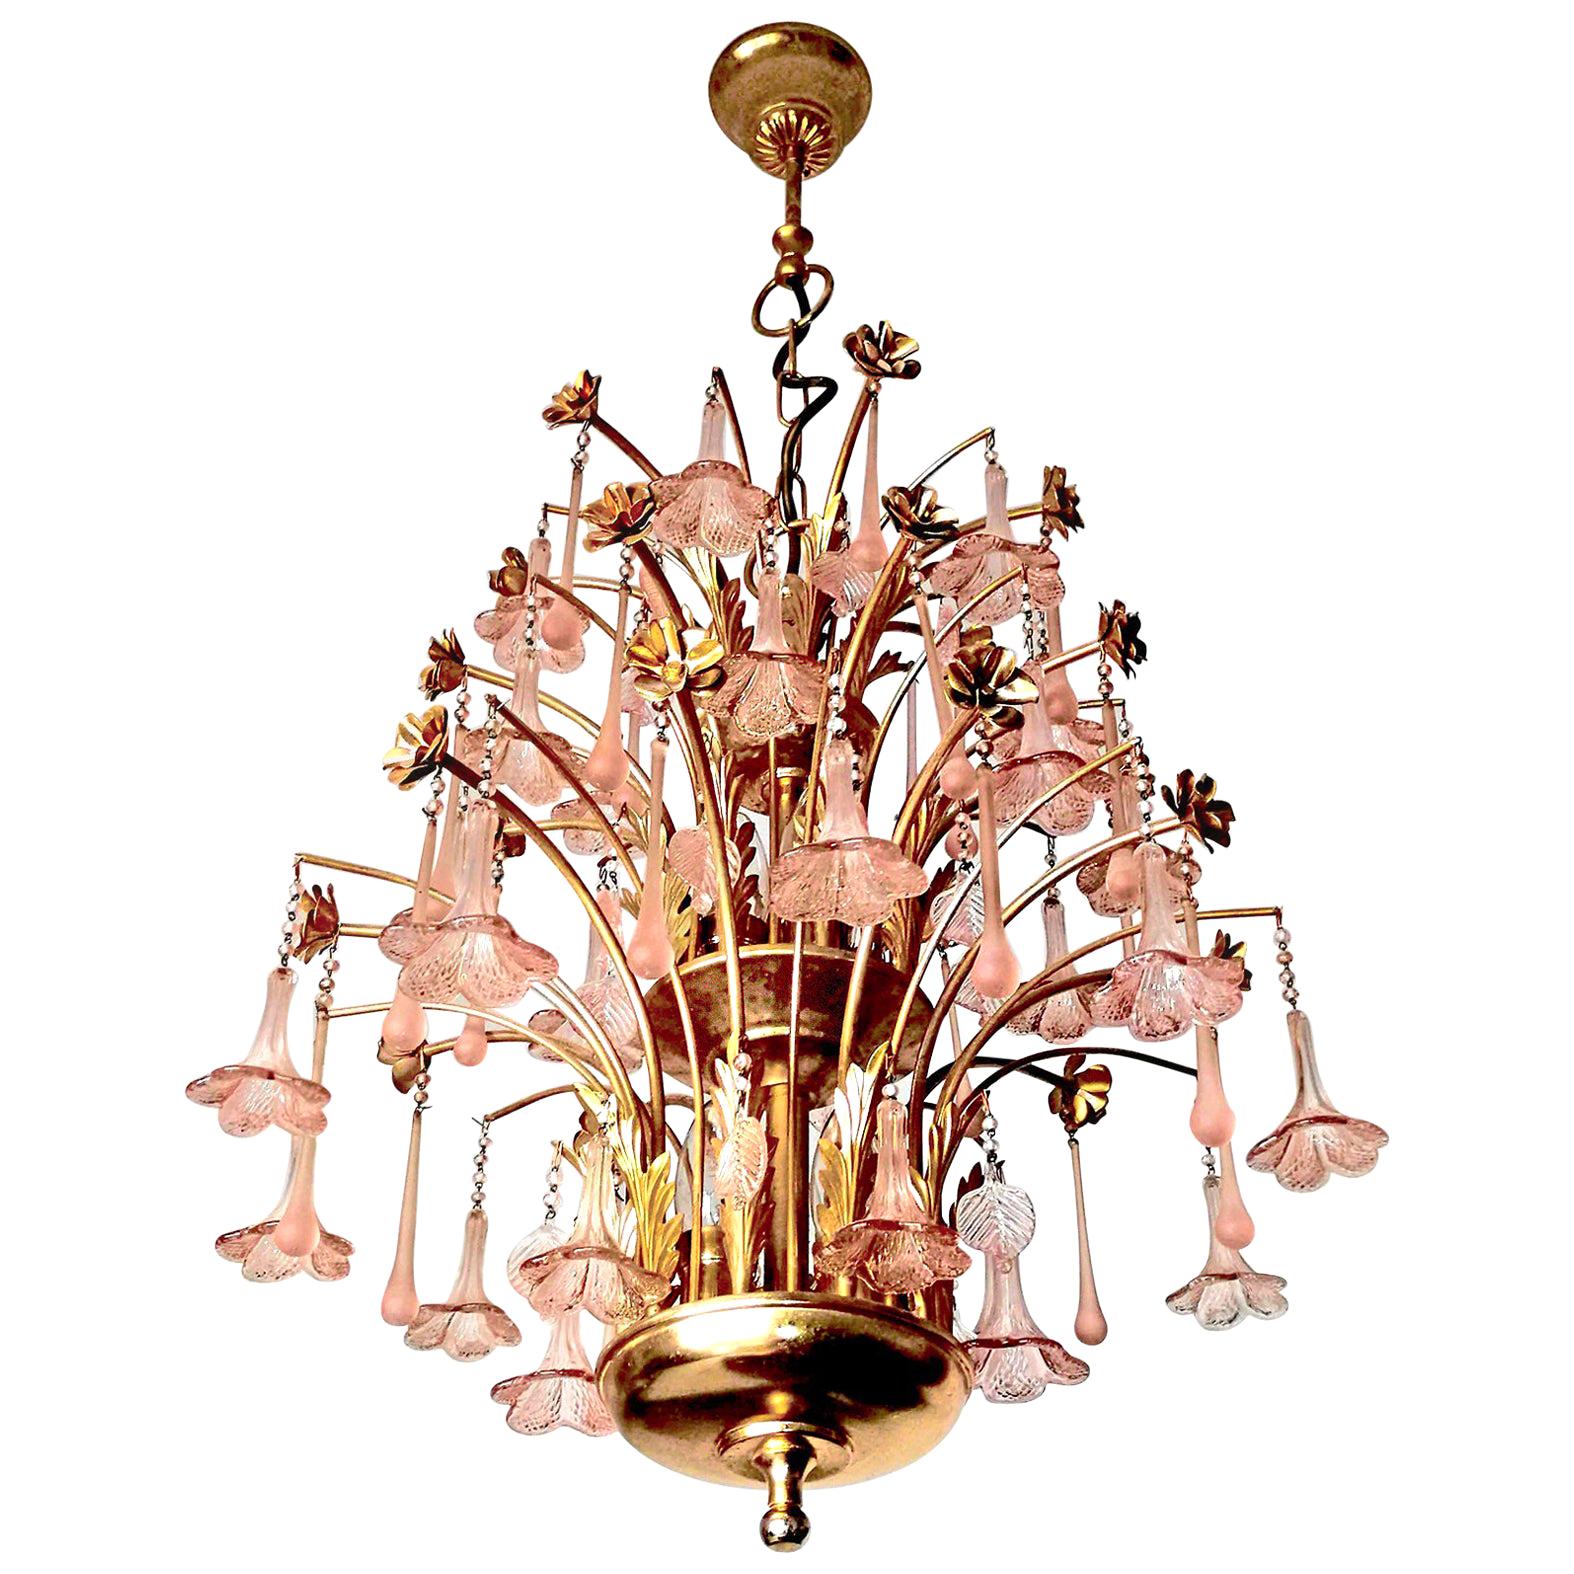 Rare gorgeous midcentury Italian Murano chandelier in the style of Venini.
Pink fogged crystal teardrops, pink glass flowers and gilt flowers waterfall 3 tiers wedding cake
Measures:
Diameter 20 in/ 50 cm
Height 40 in (11.8 in/chain)/ 100 cm (30